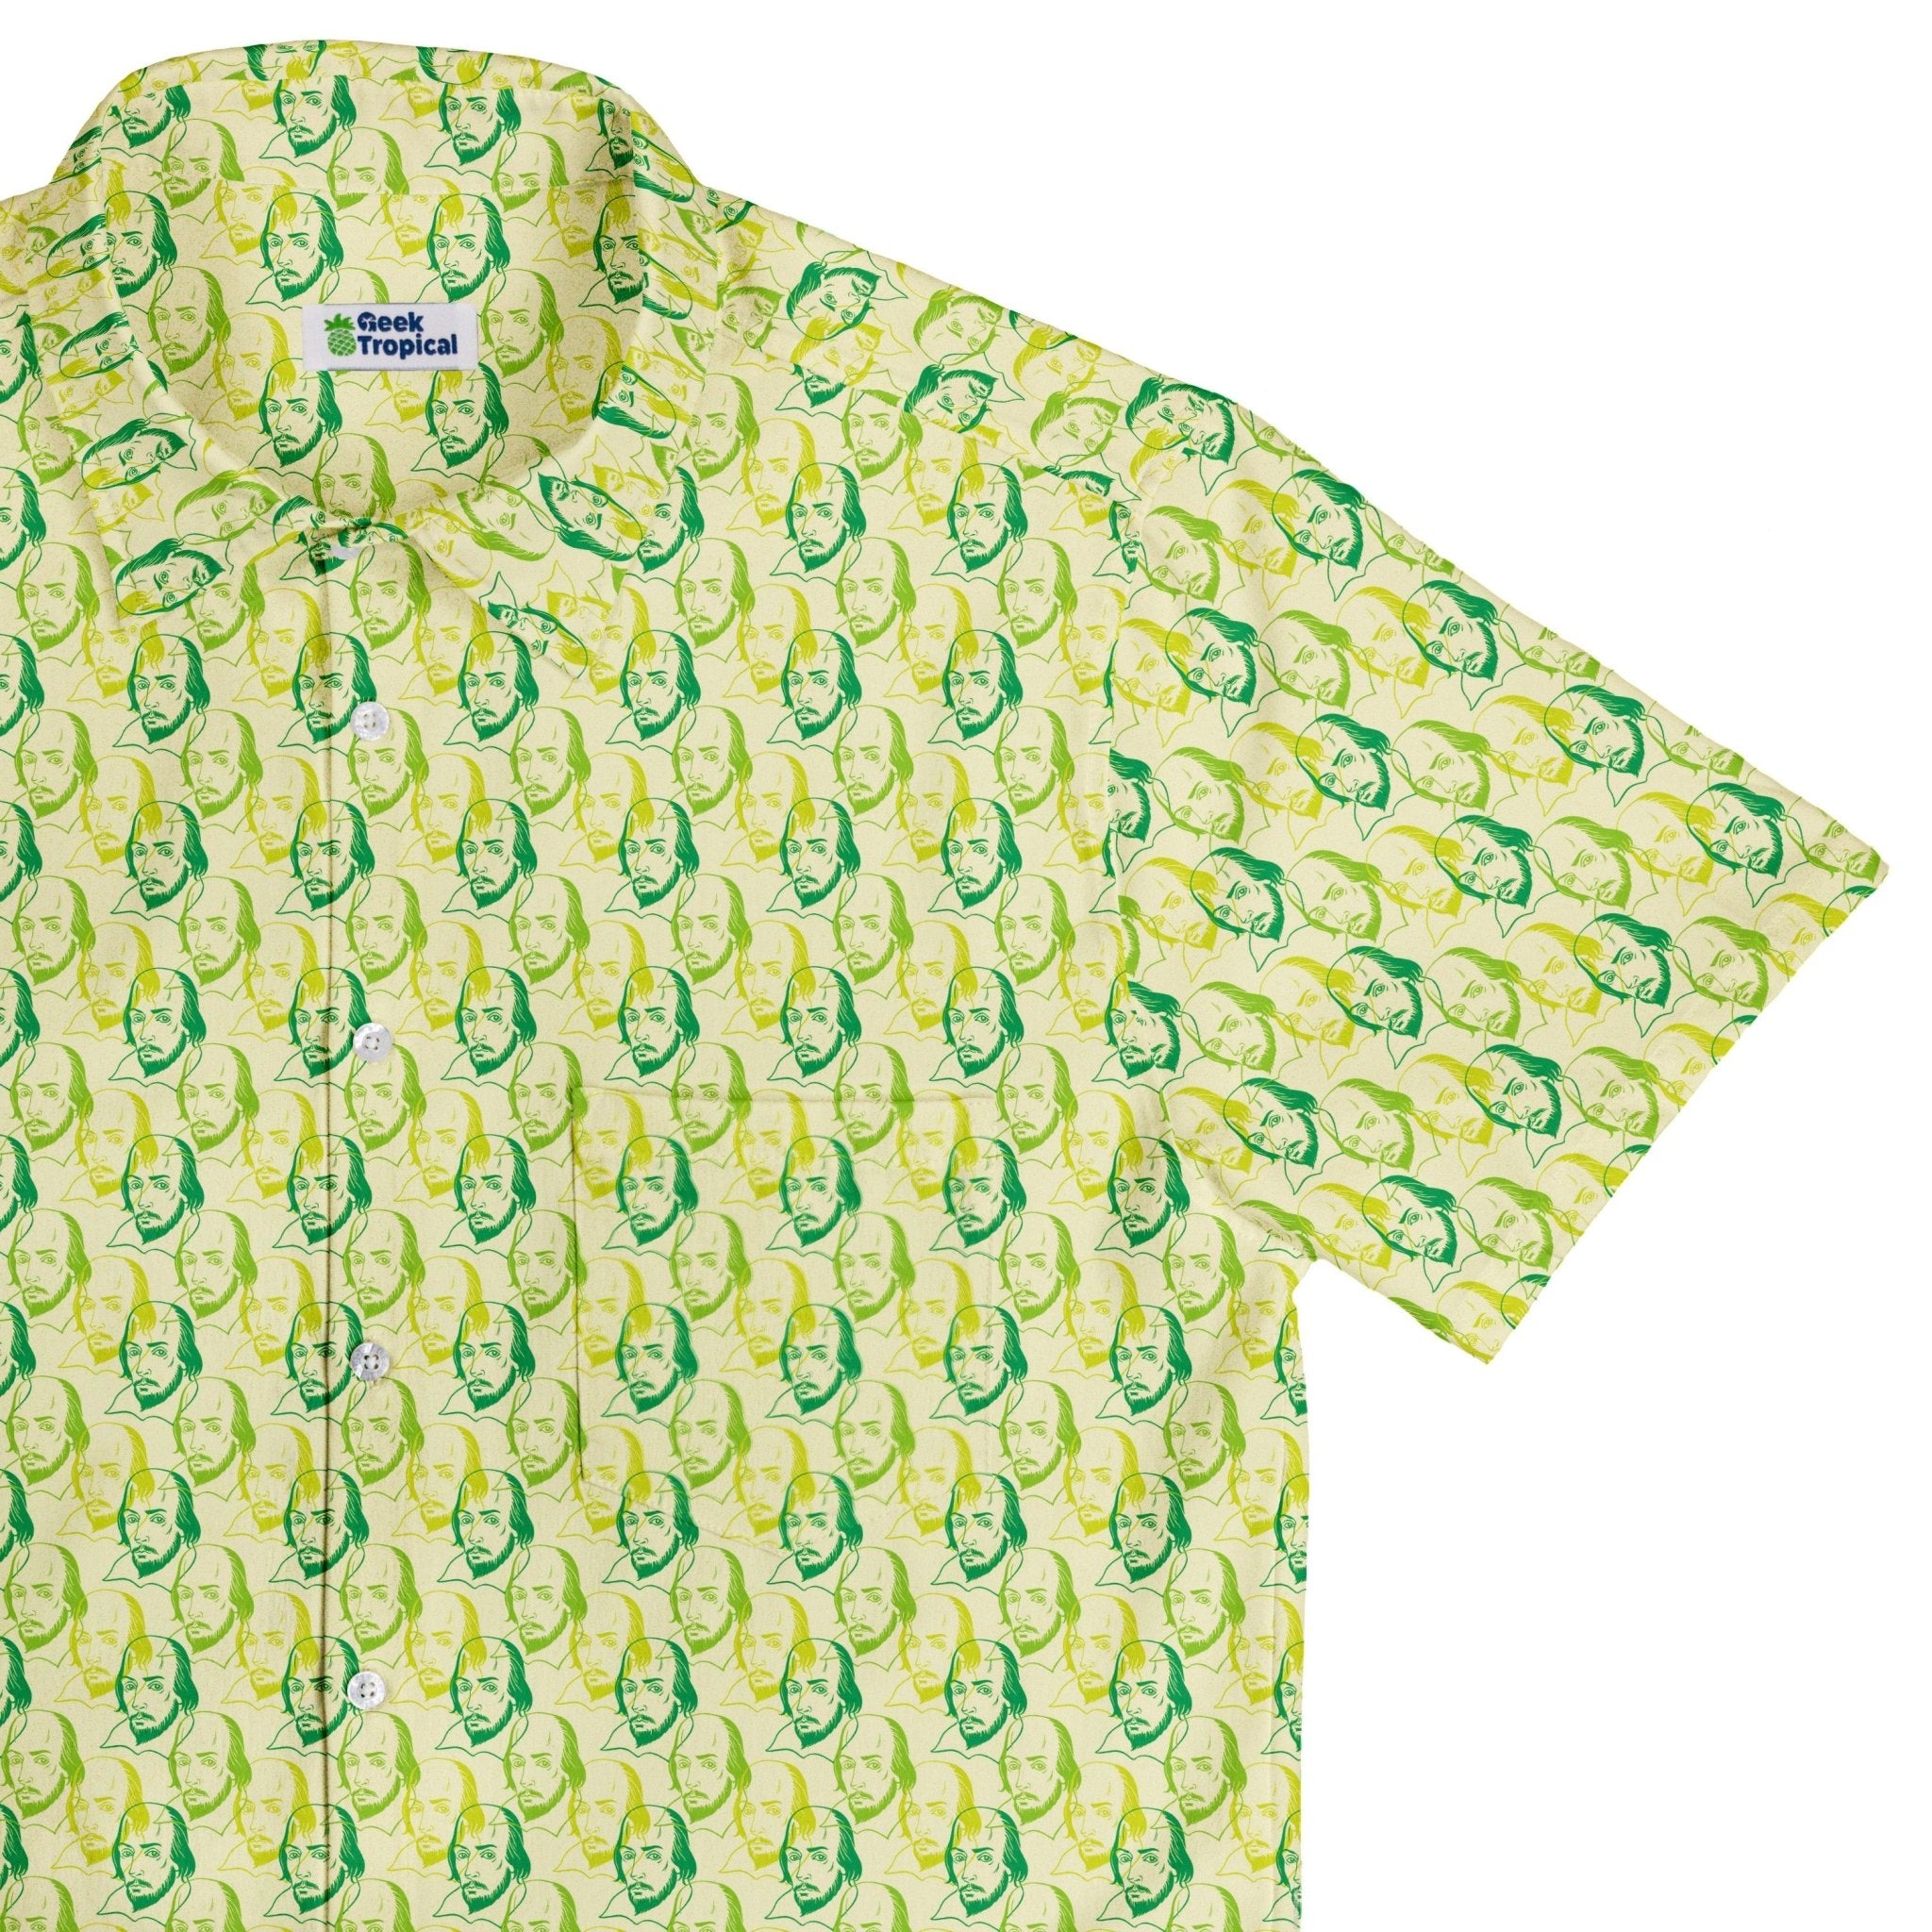 Shakespeare Green Monochrome Button Up Shirt - adult sizing - Book Prints - Simple Patterns